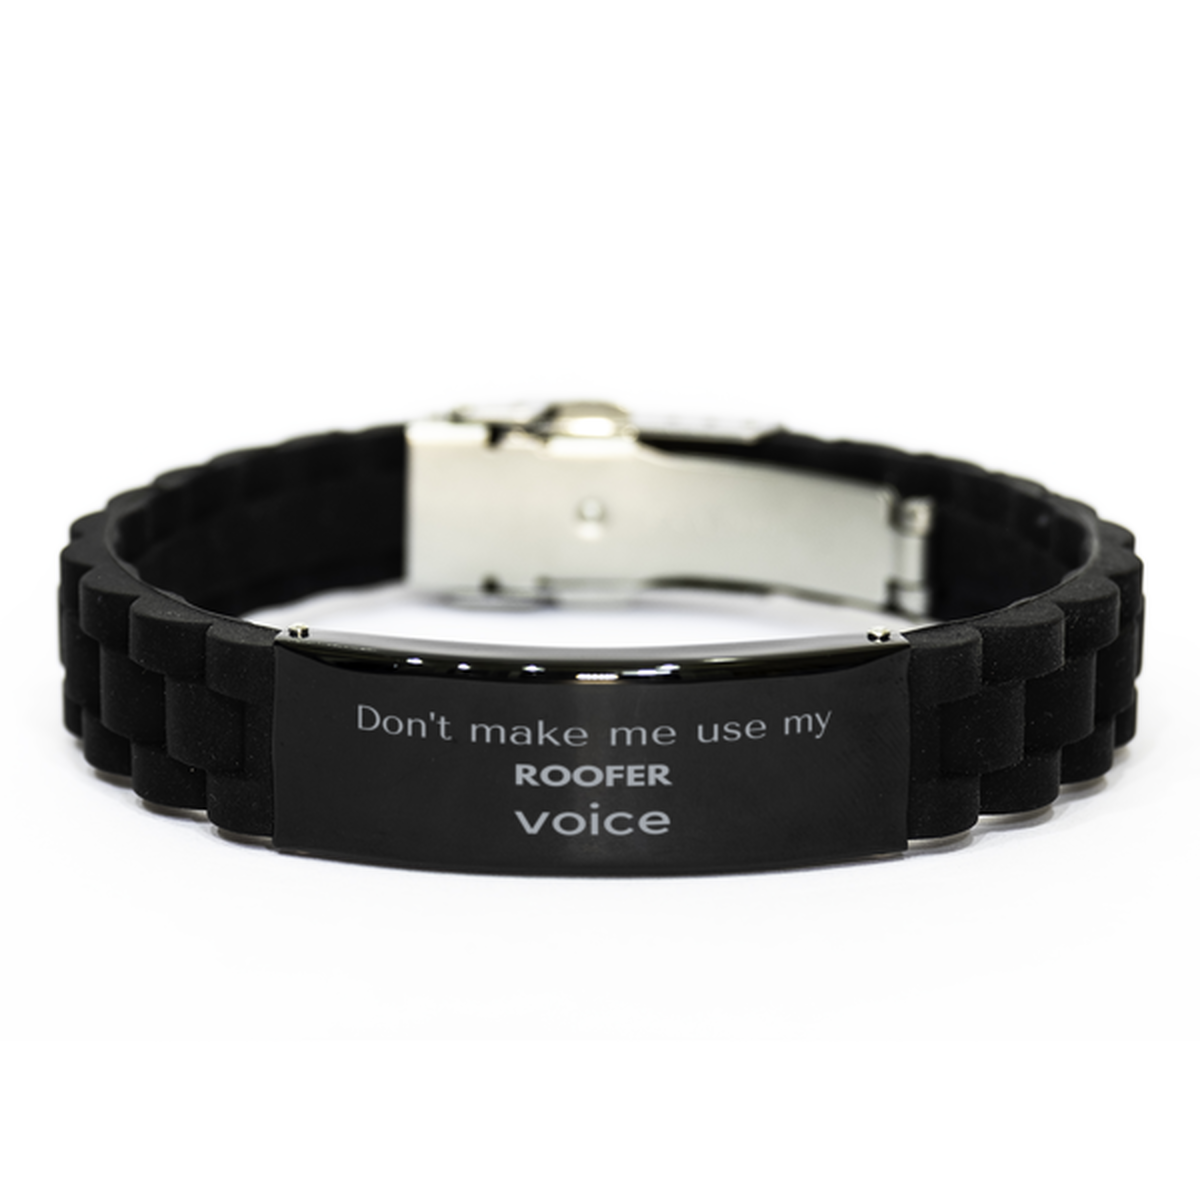 Don't make me use my Roofer voice, Sarcasm Roofer Gifts, Christmas Roofer Black Glidelock Clasp Bracelet Birthday Unique Gifts For Roofer Coworkers, Men, Women, Colleague, Friends